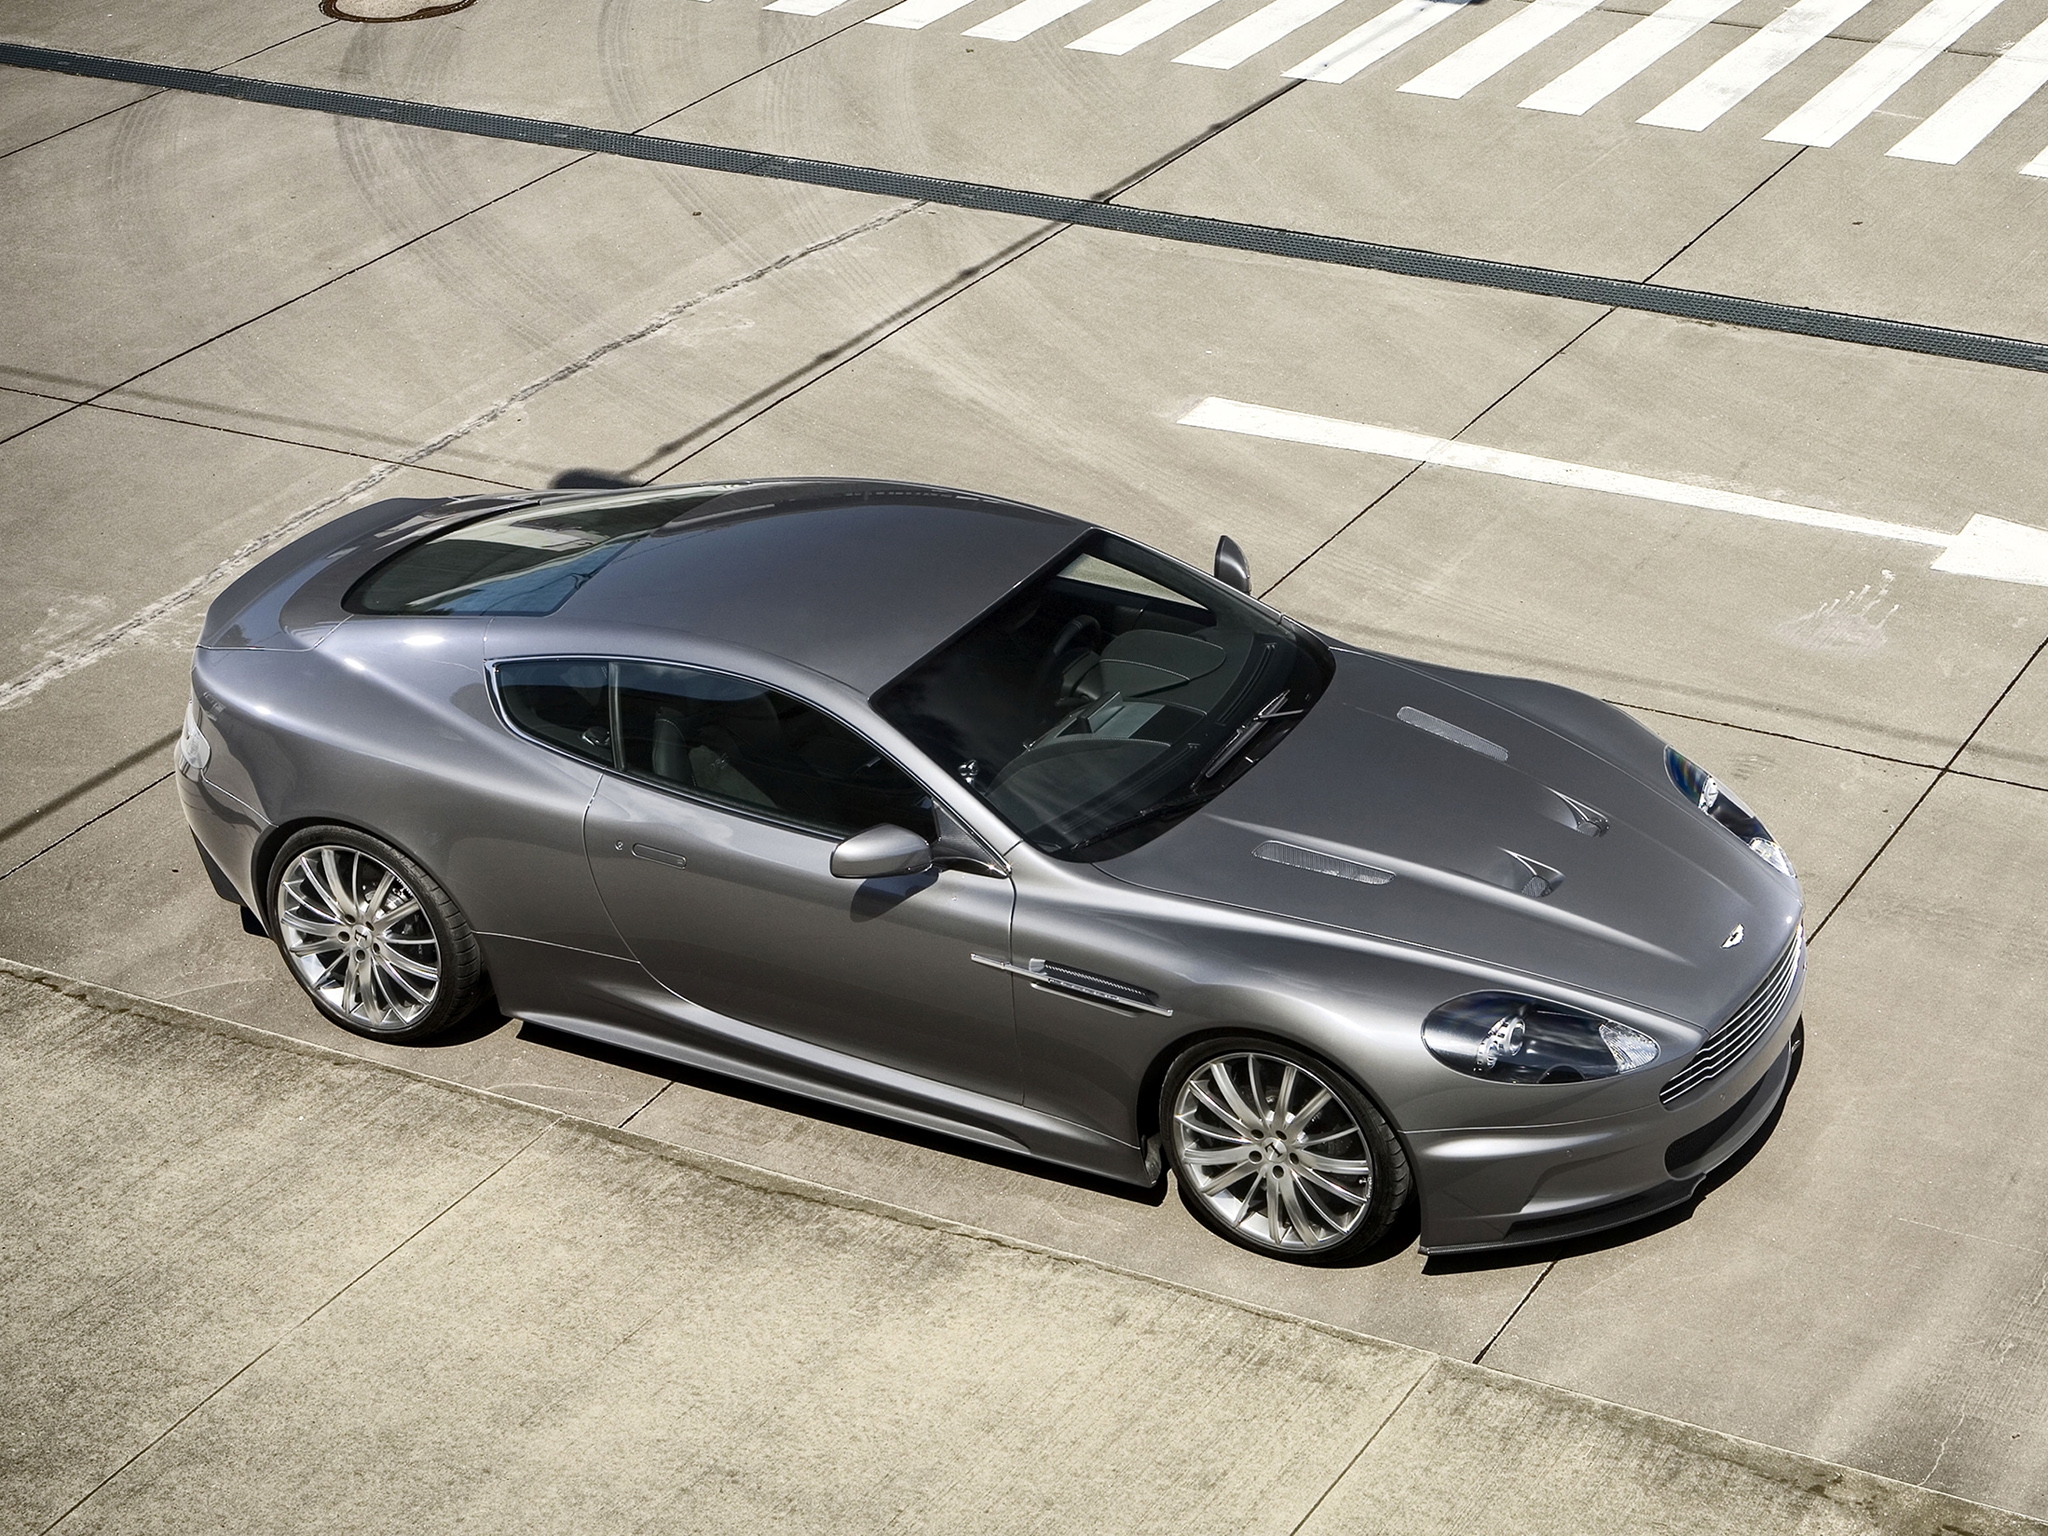 aston martin, cars, view from above, asphalt, grey, style, dbs, 2009